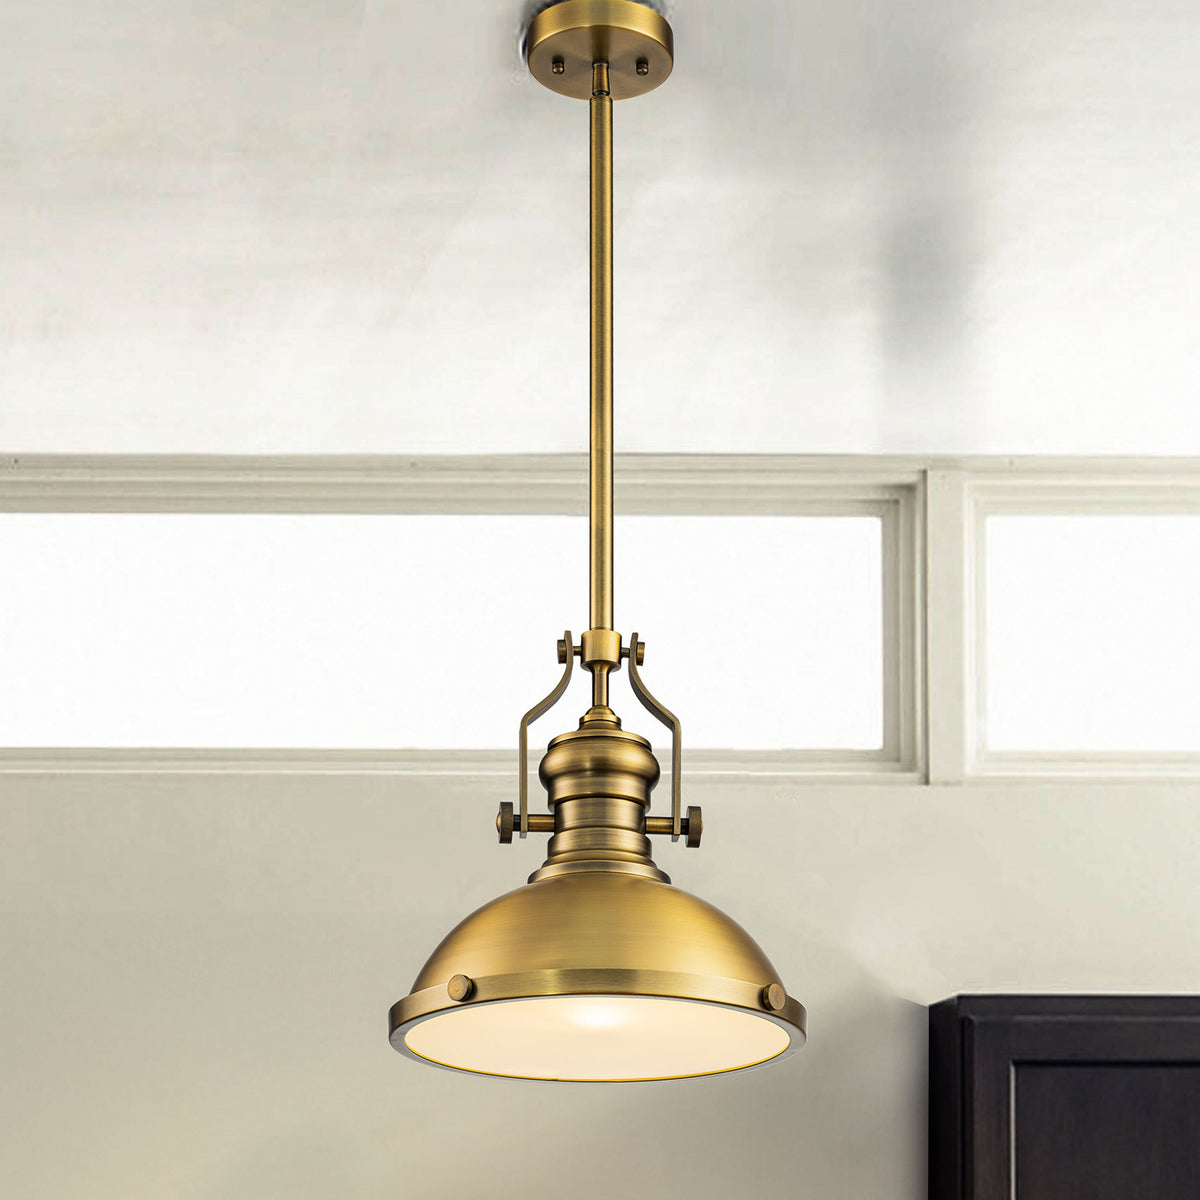 Industrial Antique Brass Dome Pendant Light for Kitchen Island